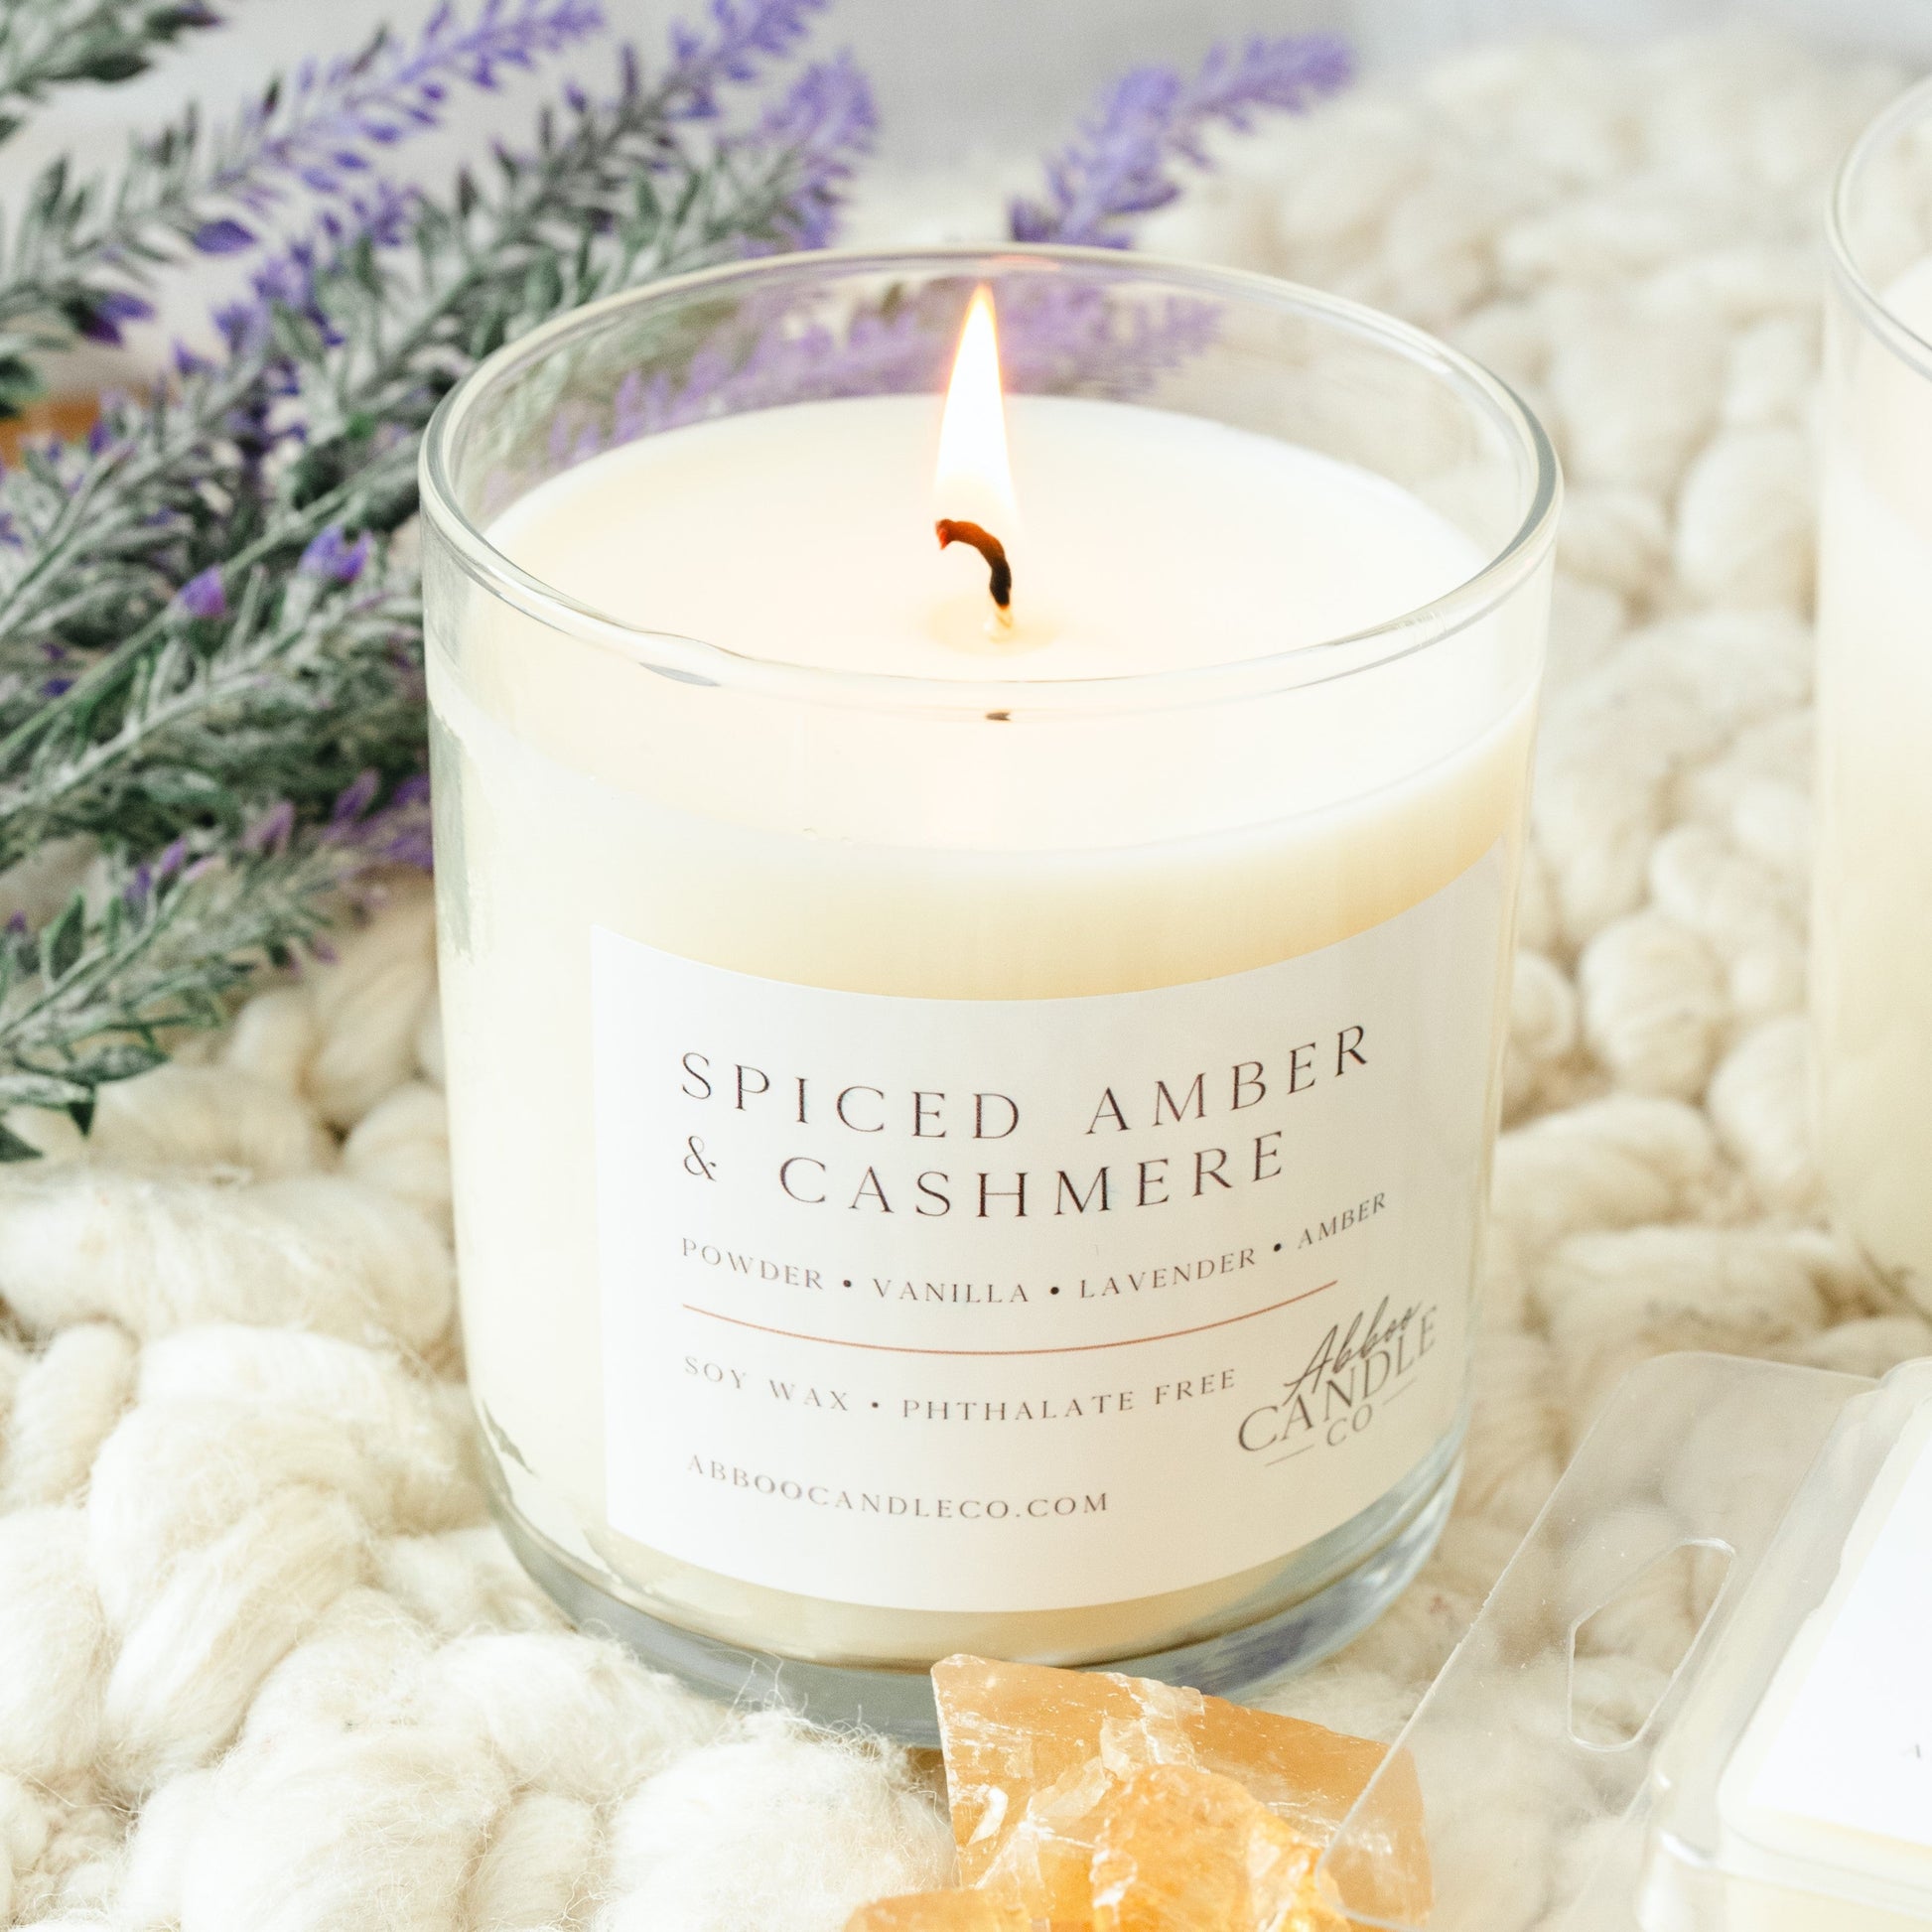 Spiced Amber and Cashmere Tumbler Soy Candle - Abboo Candle Co® Wholesale